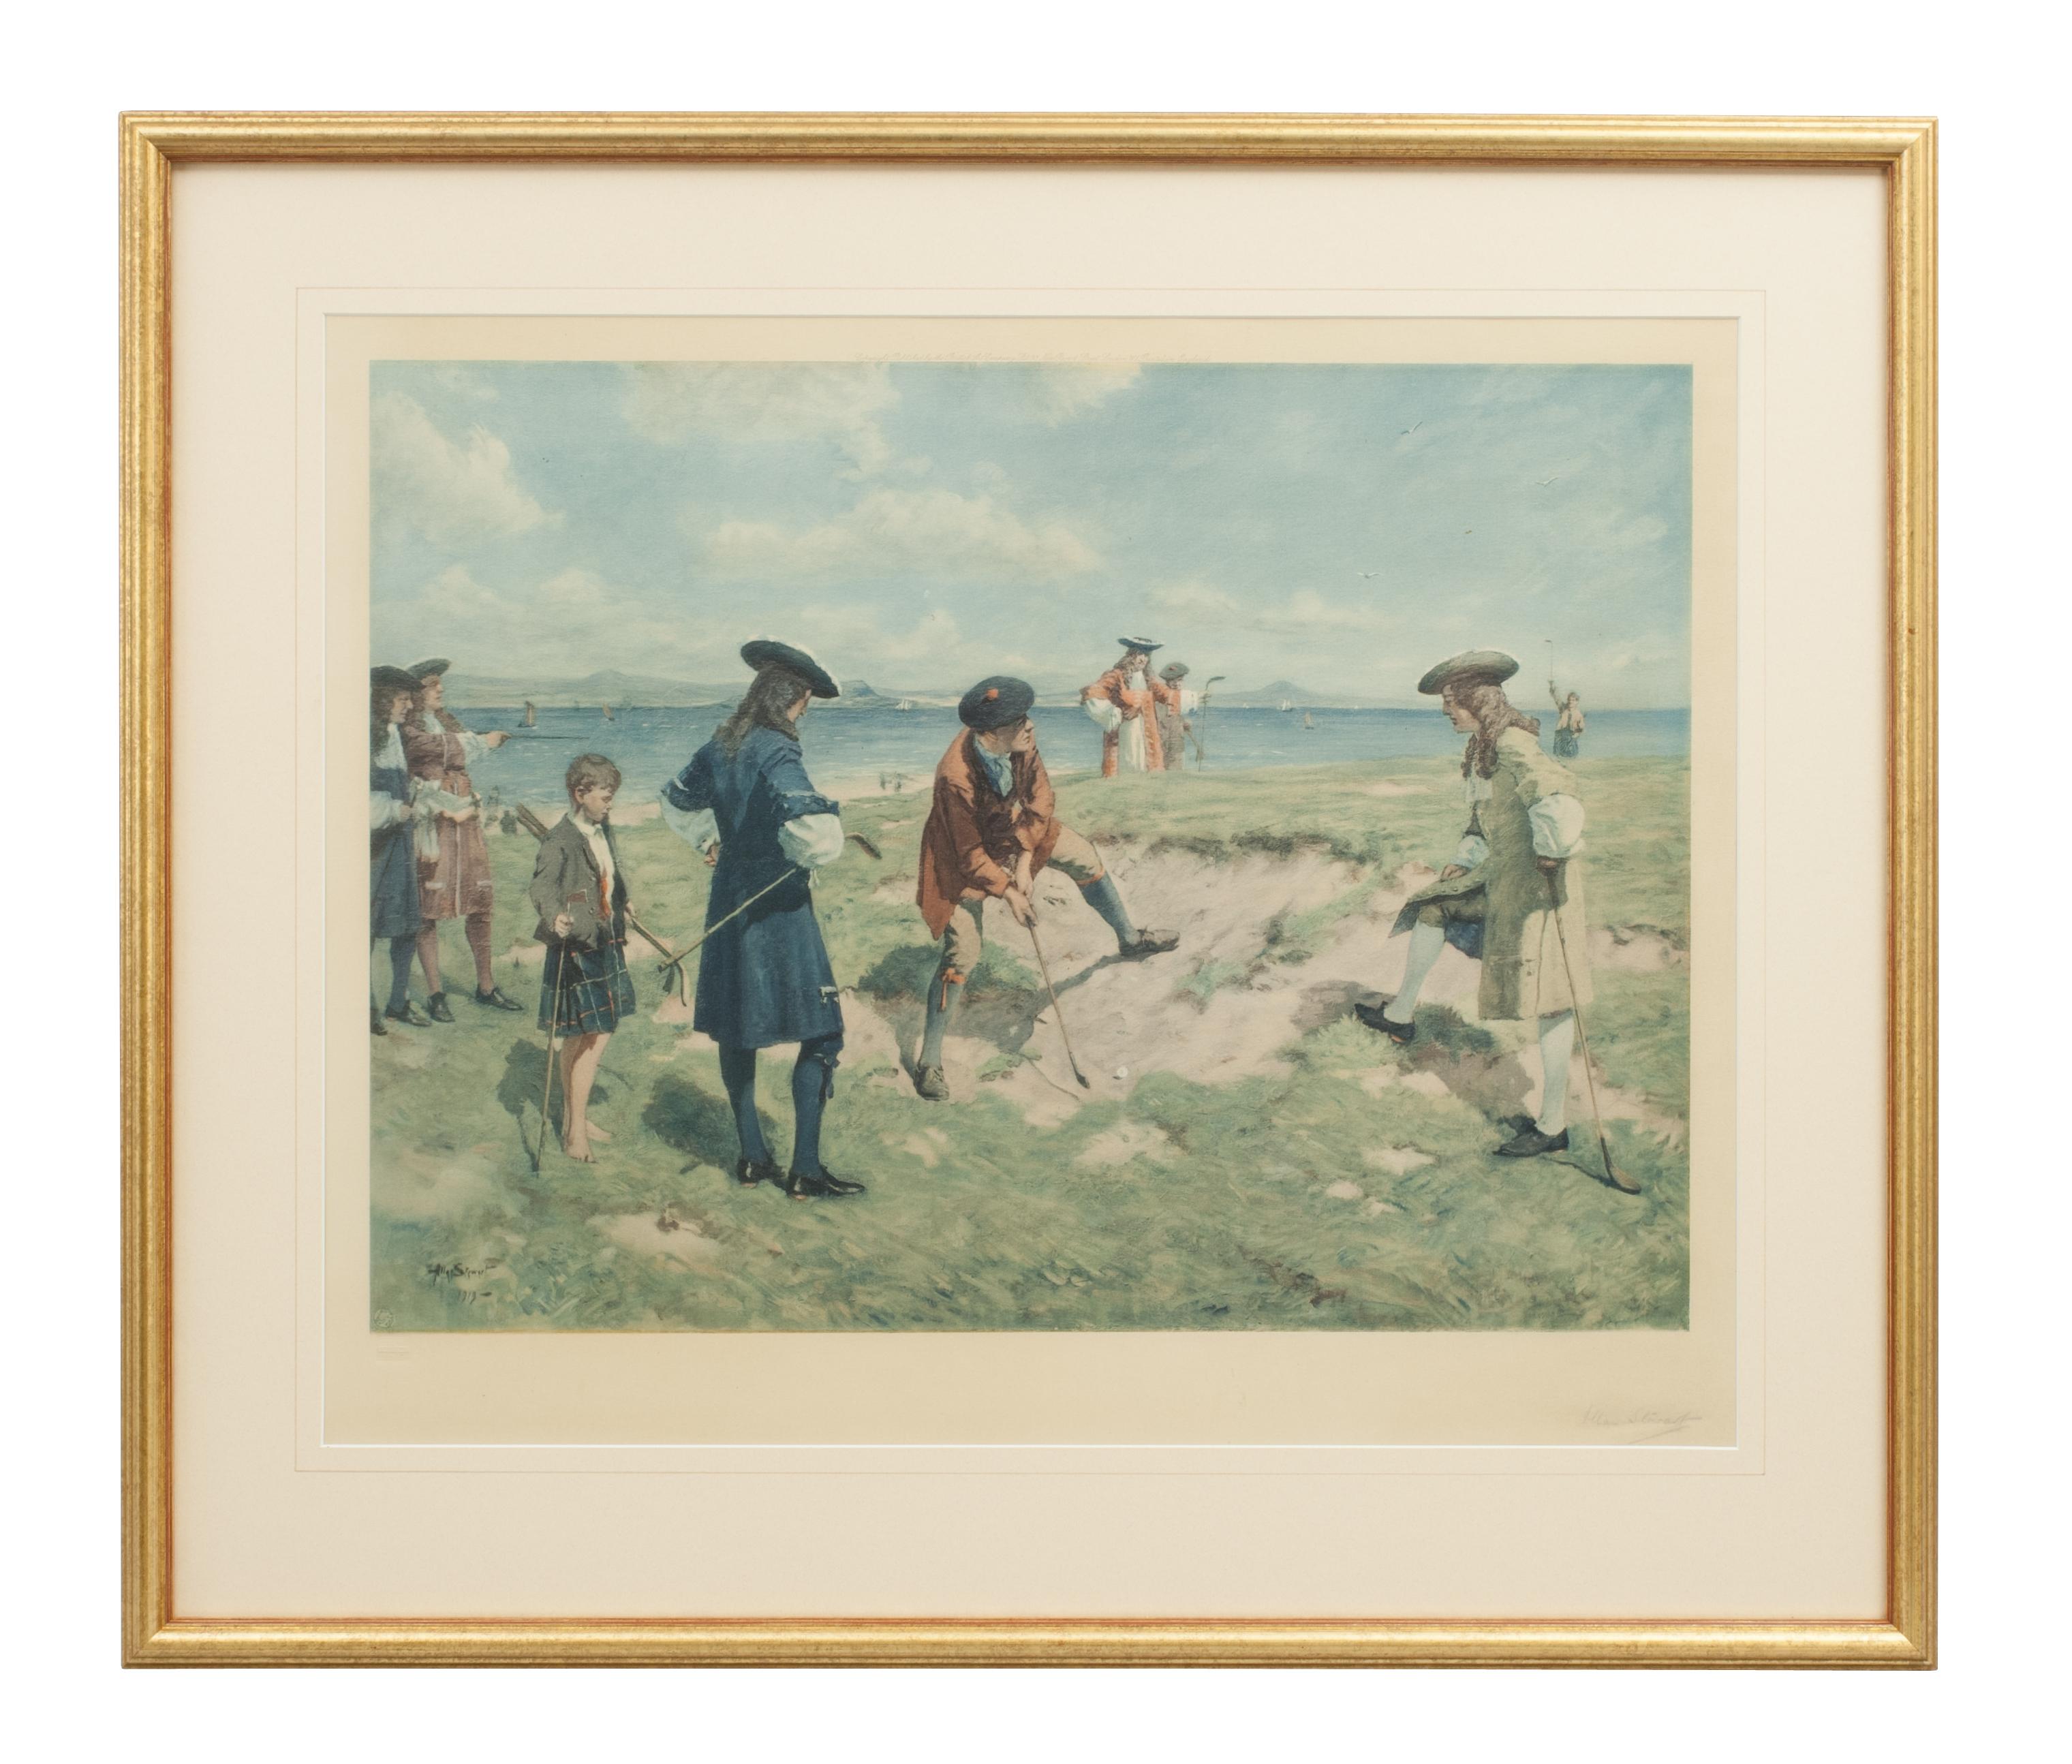 A rare original photolithograph print titled 'The First International Foursome, Played on Leith Links, 1682'. The print is signed in pencil by the Scottish painter and illustrator, Allen Stewart and is taken from his original painting. Stewart's